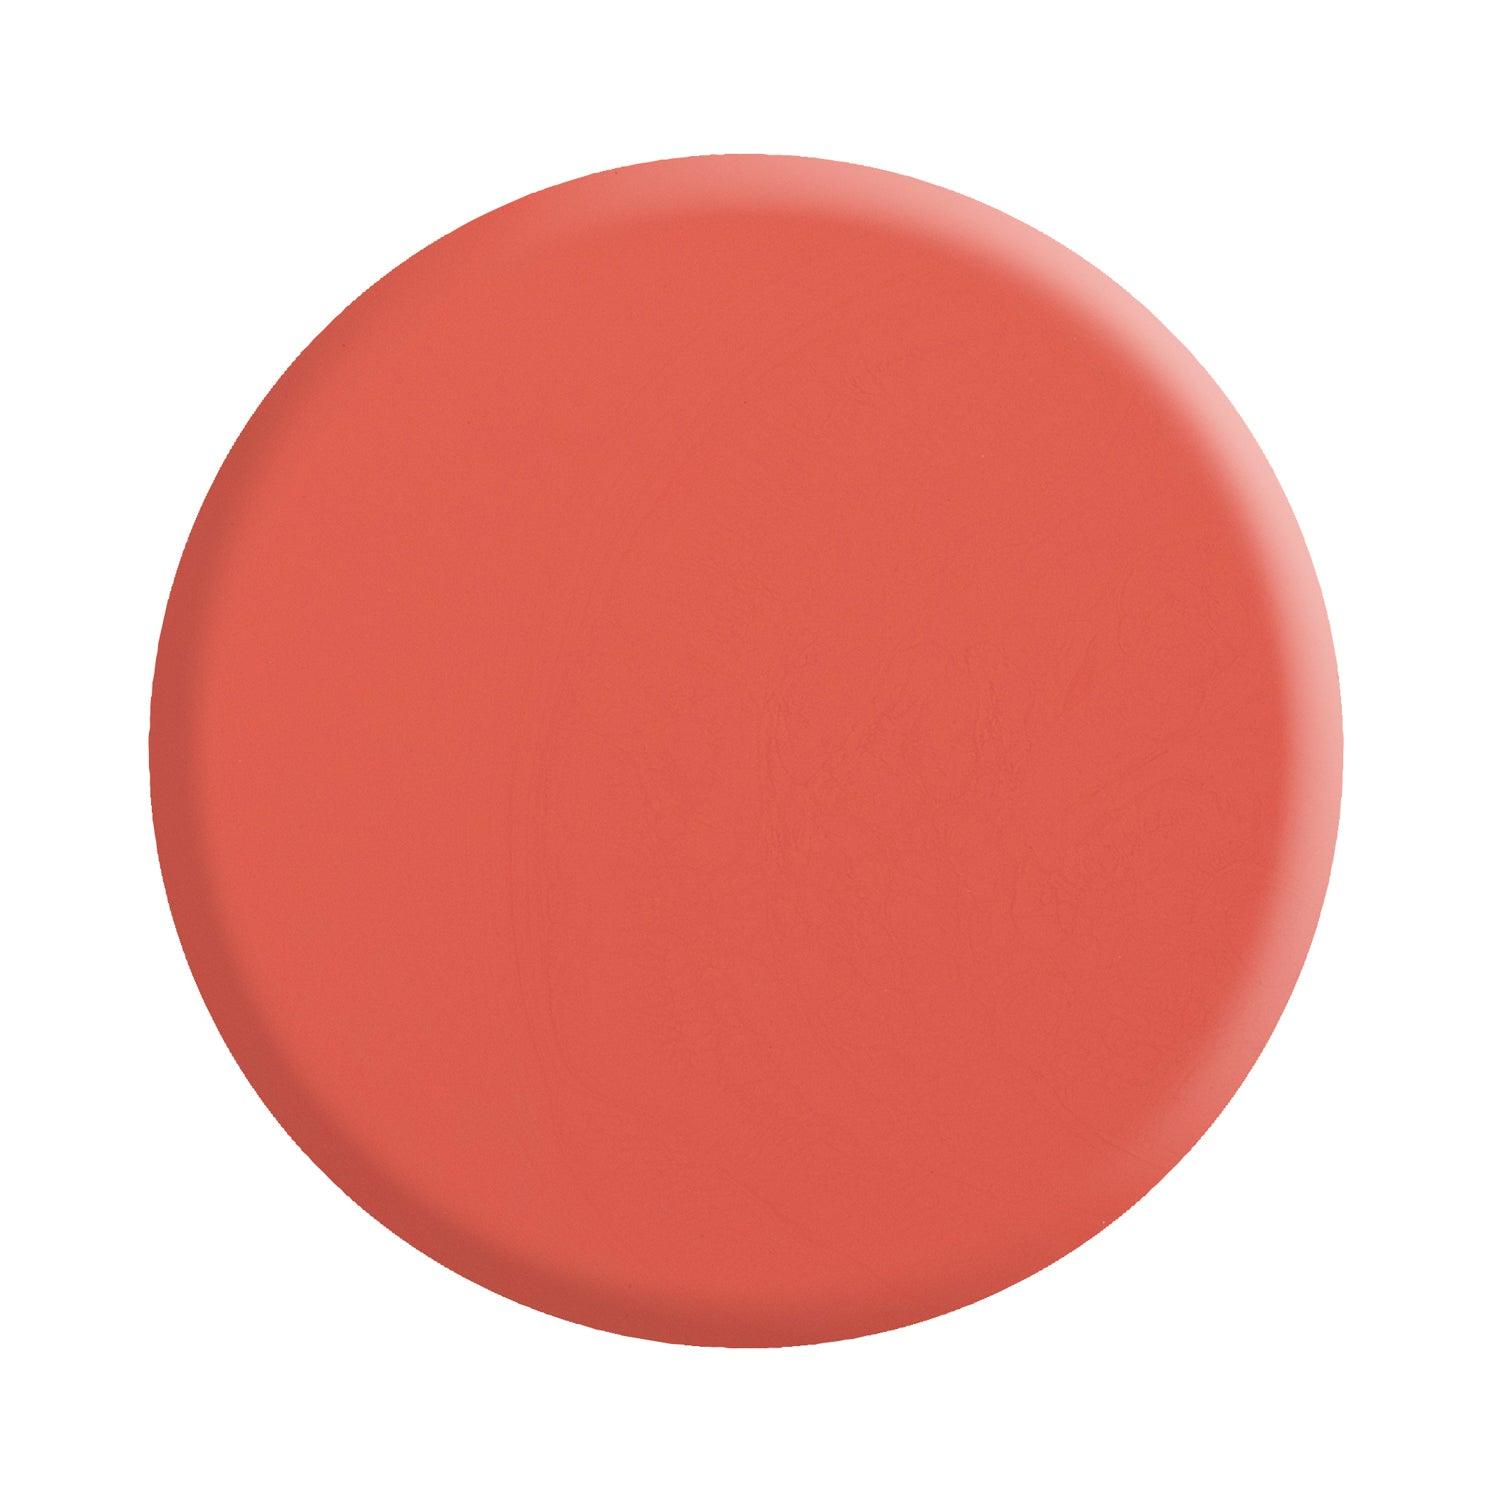 Limited Edition - Can we Coral it a Day? - LEW29A - LENA NAIL POLISH DIRECT